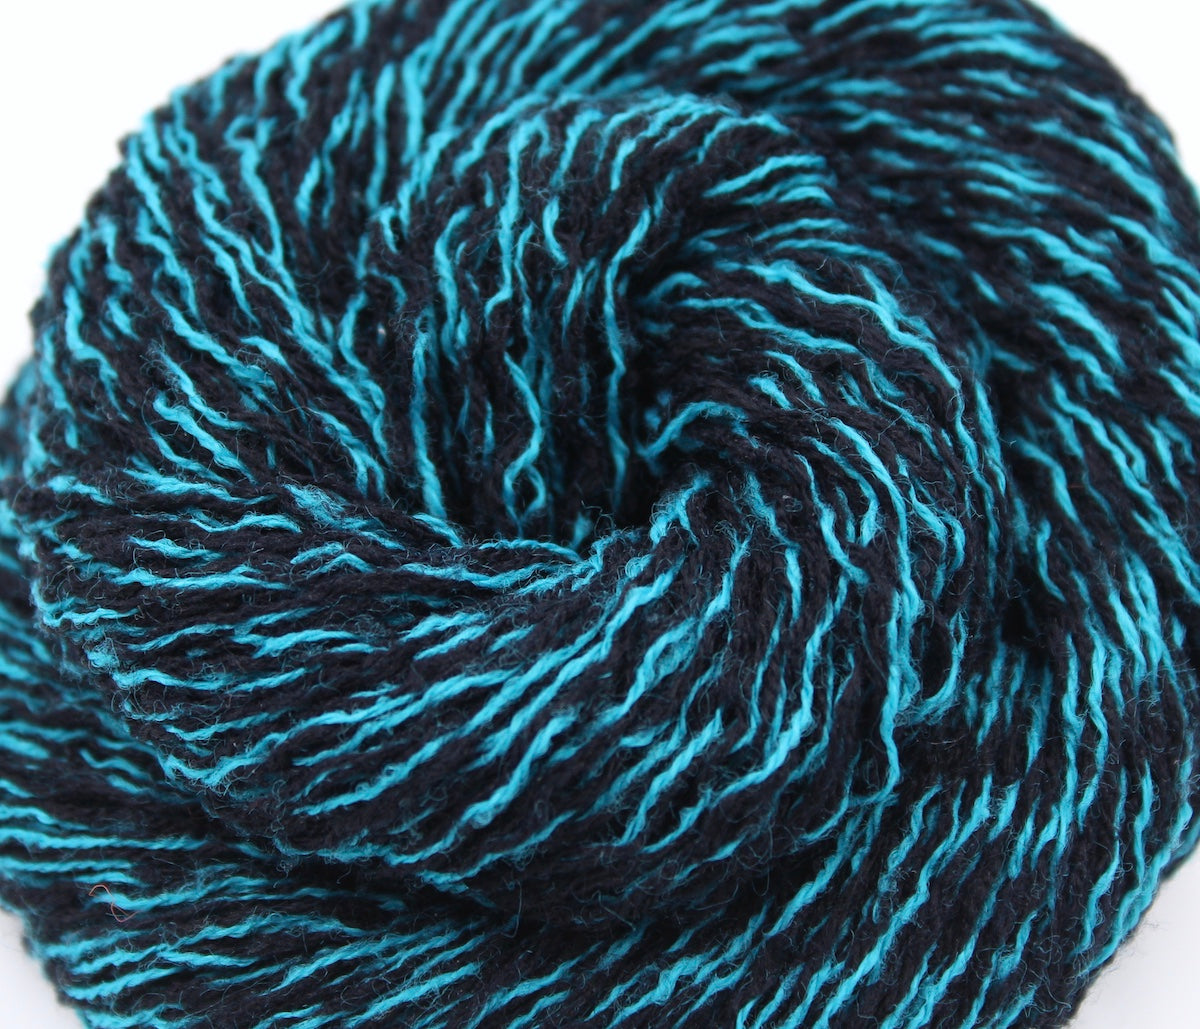 A close up shot of a skein of black and blue sport weight Yarn recycled by hand from unwanted sweaters beautifully coiled in the center of the frame.